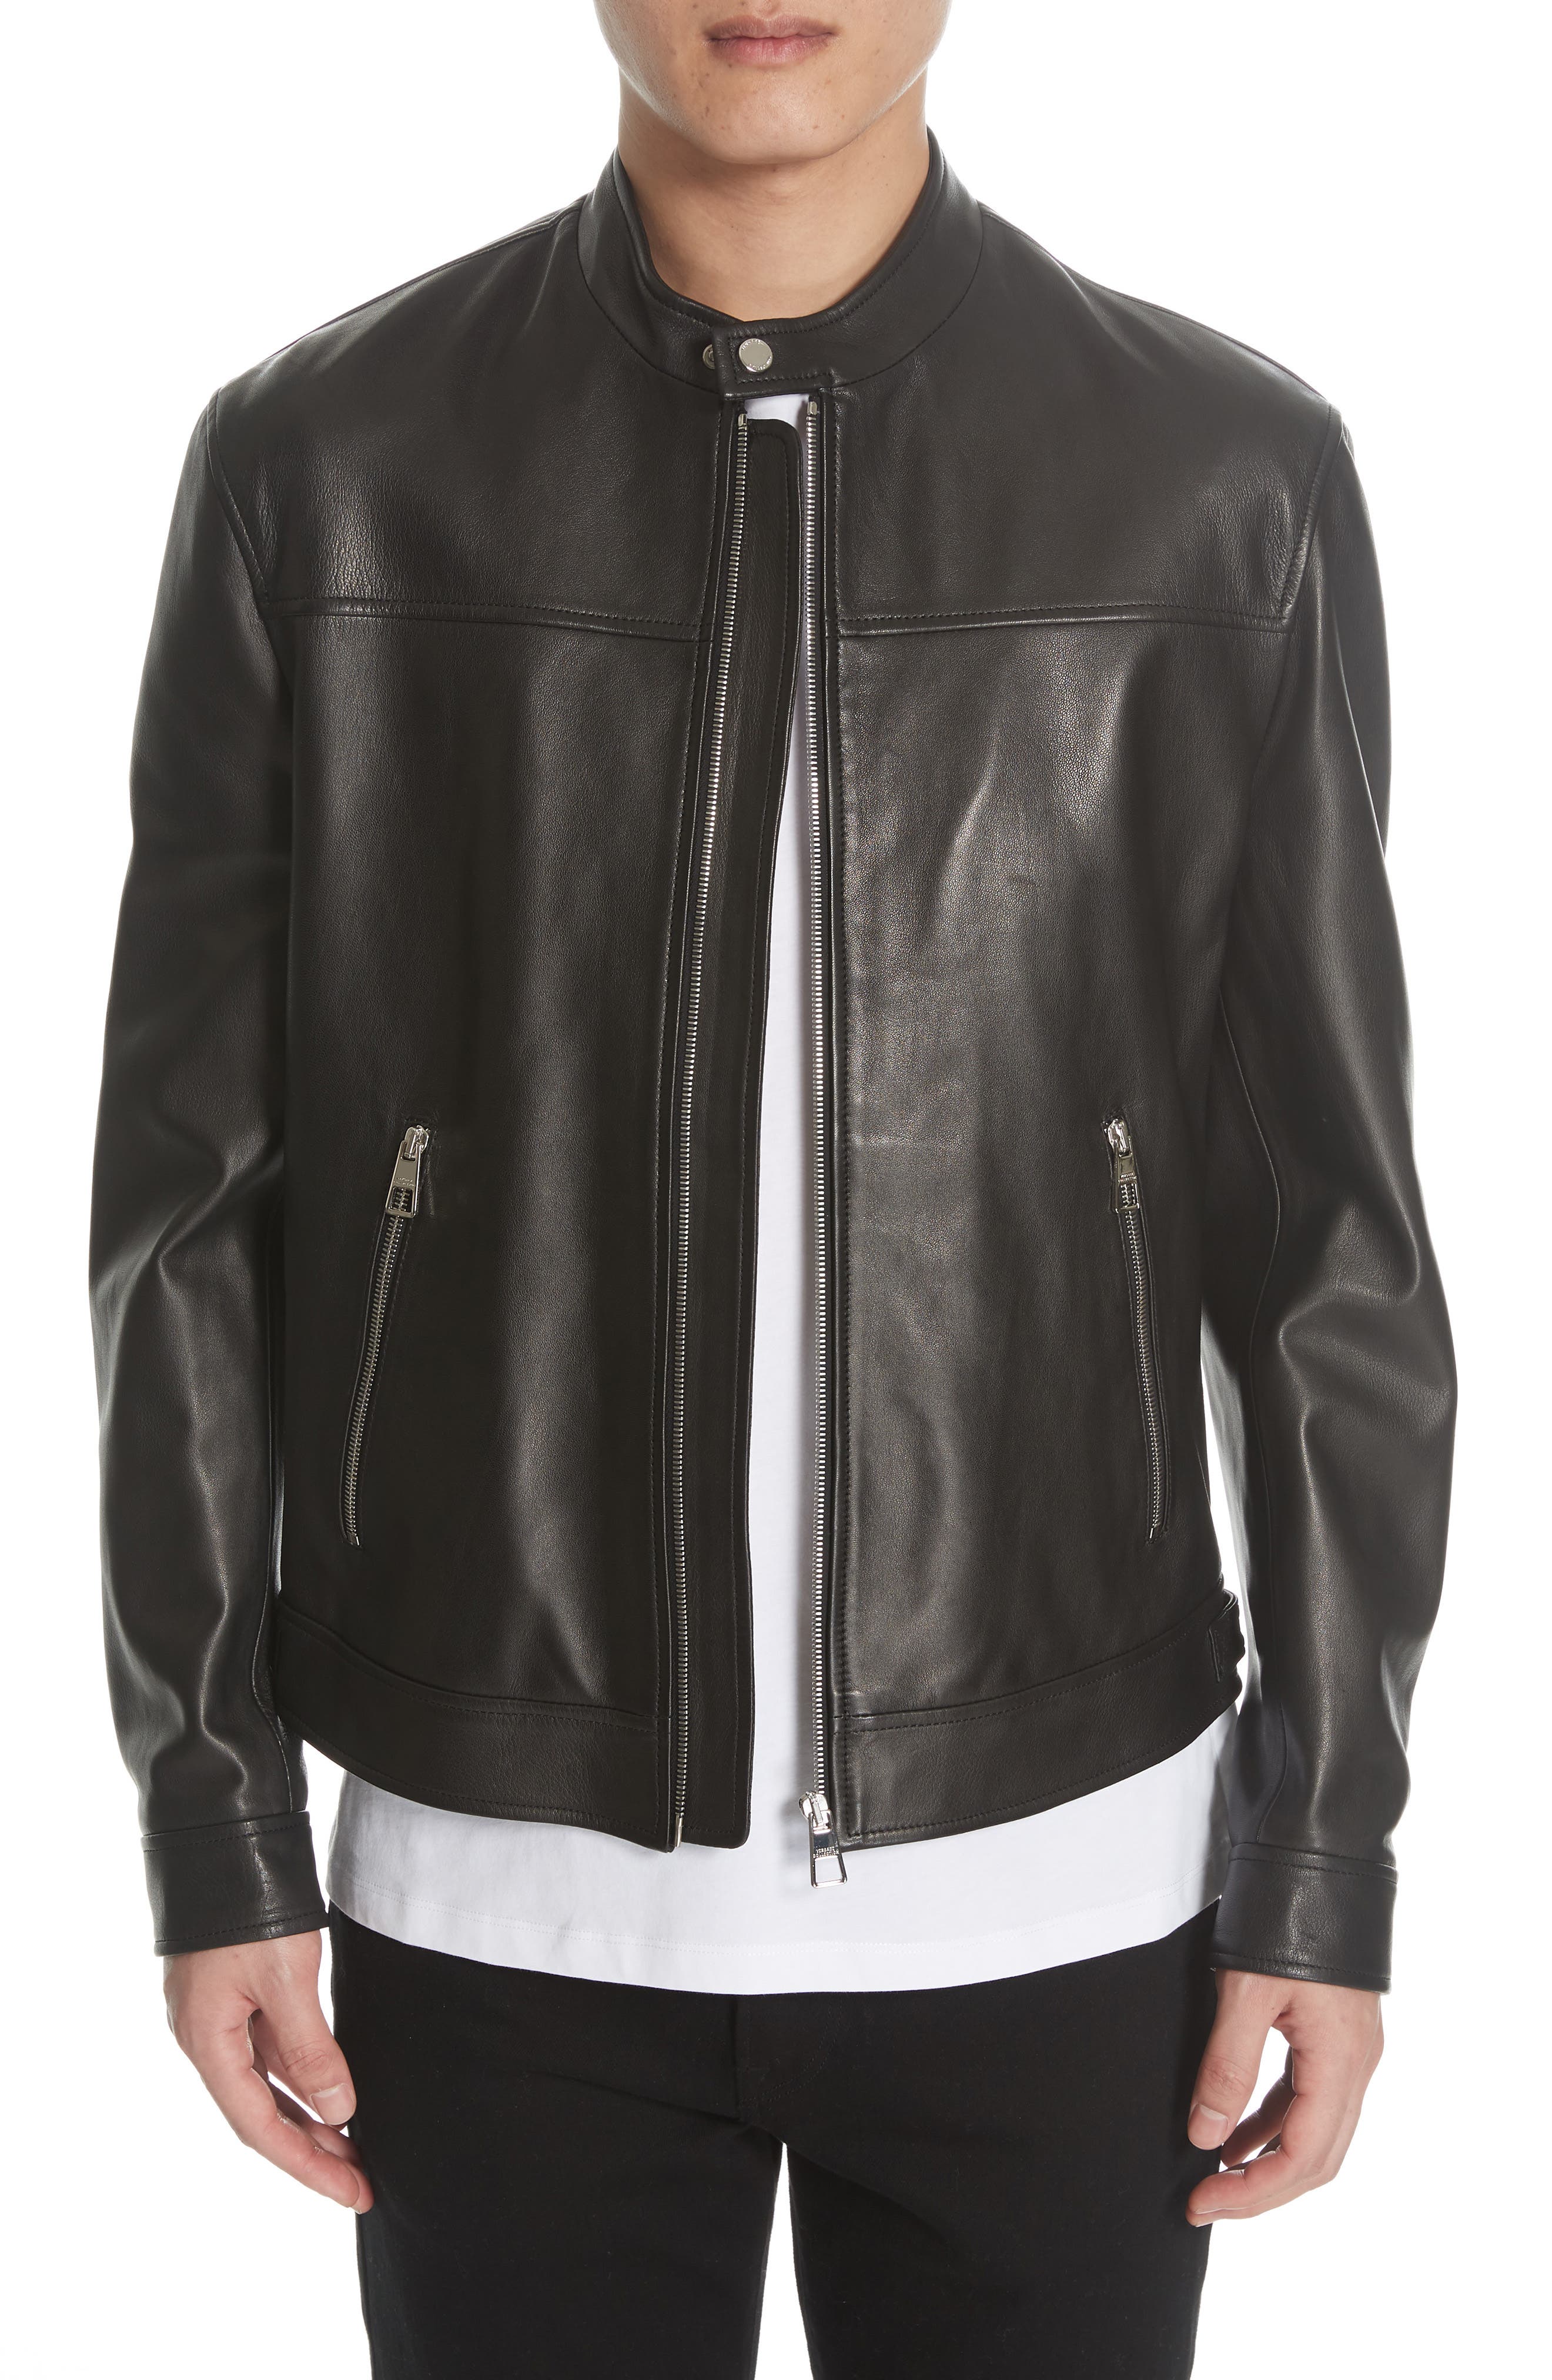 versace collection jacket